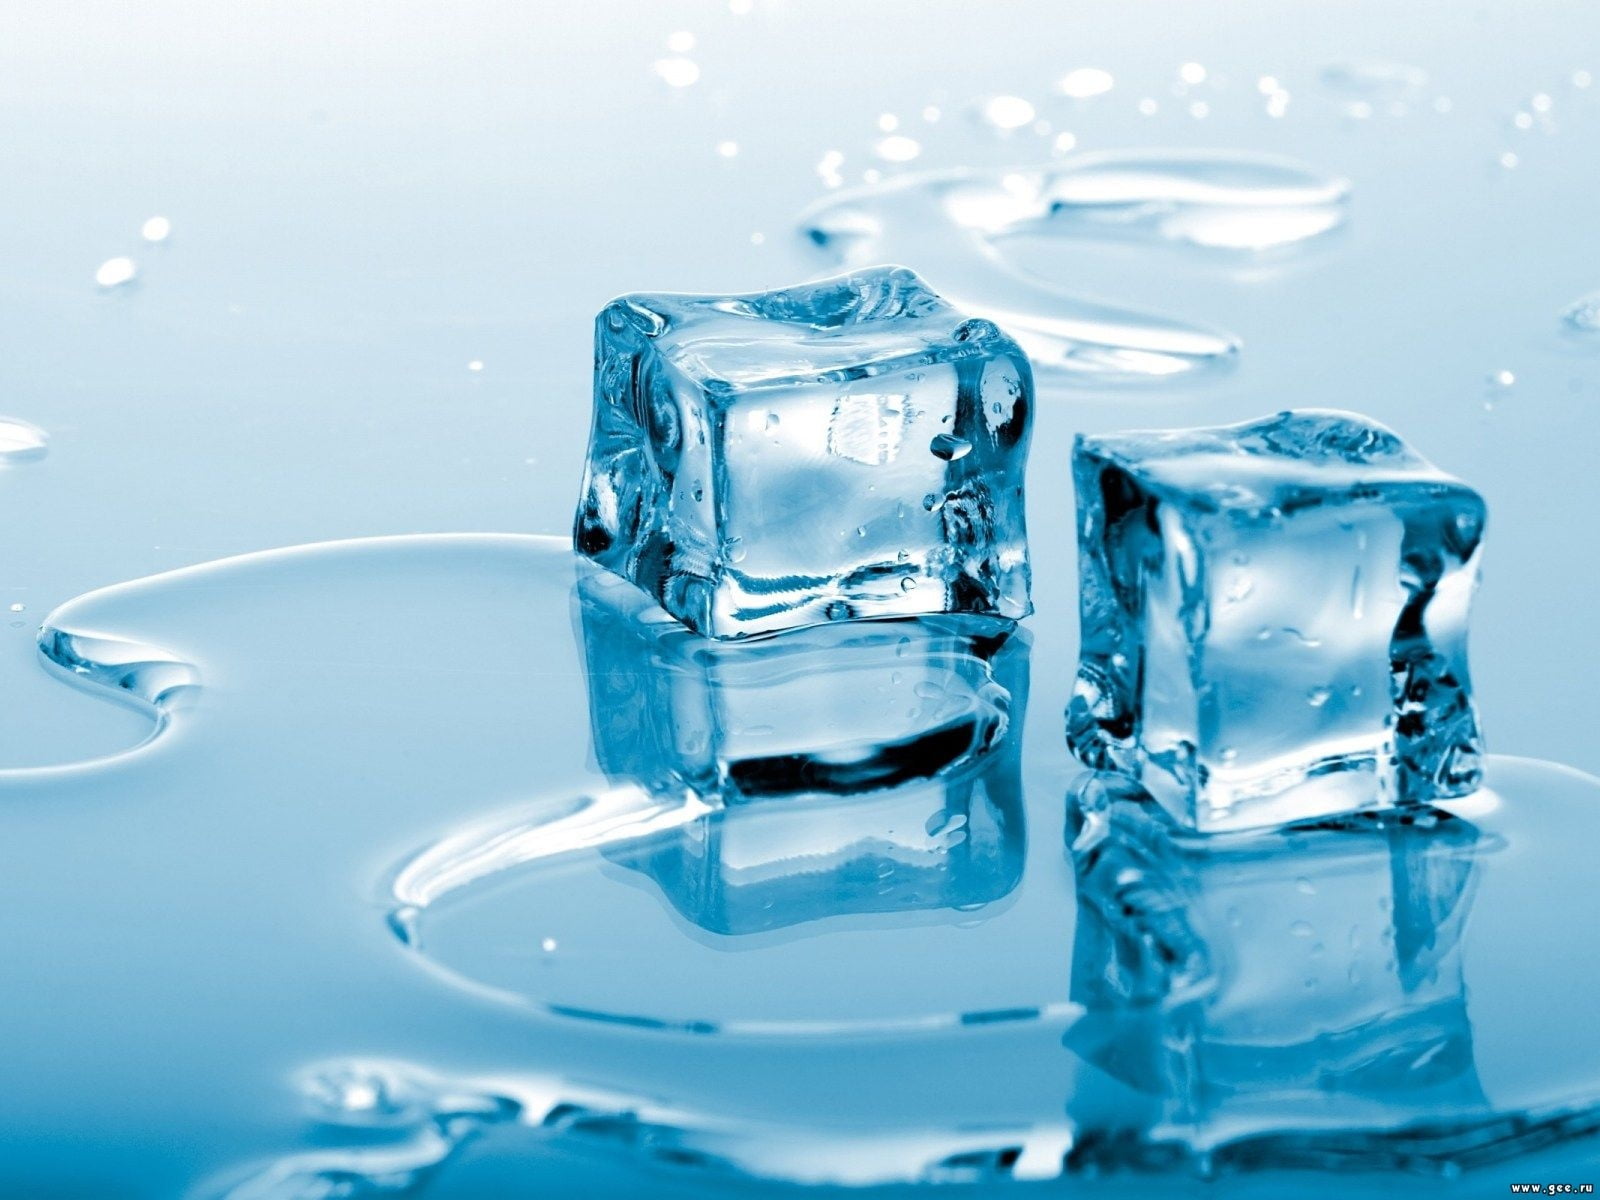 two ice cubes on blue surface